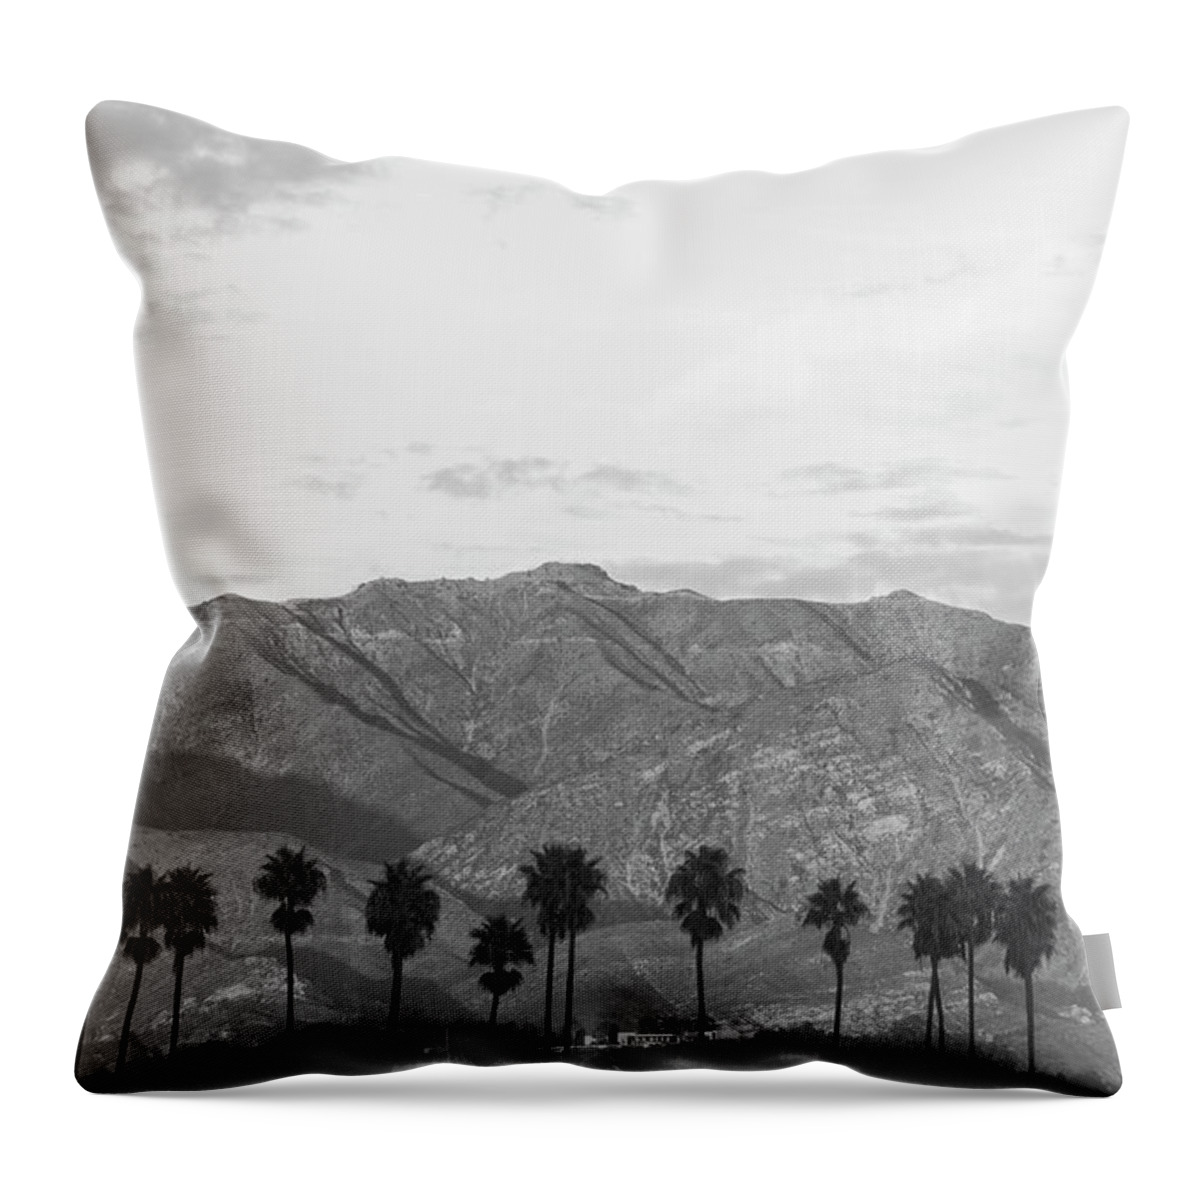 Photography Throw Pillow featuring the photograph Scenic Mountainous Landscape With Palm by Panoramic Images